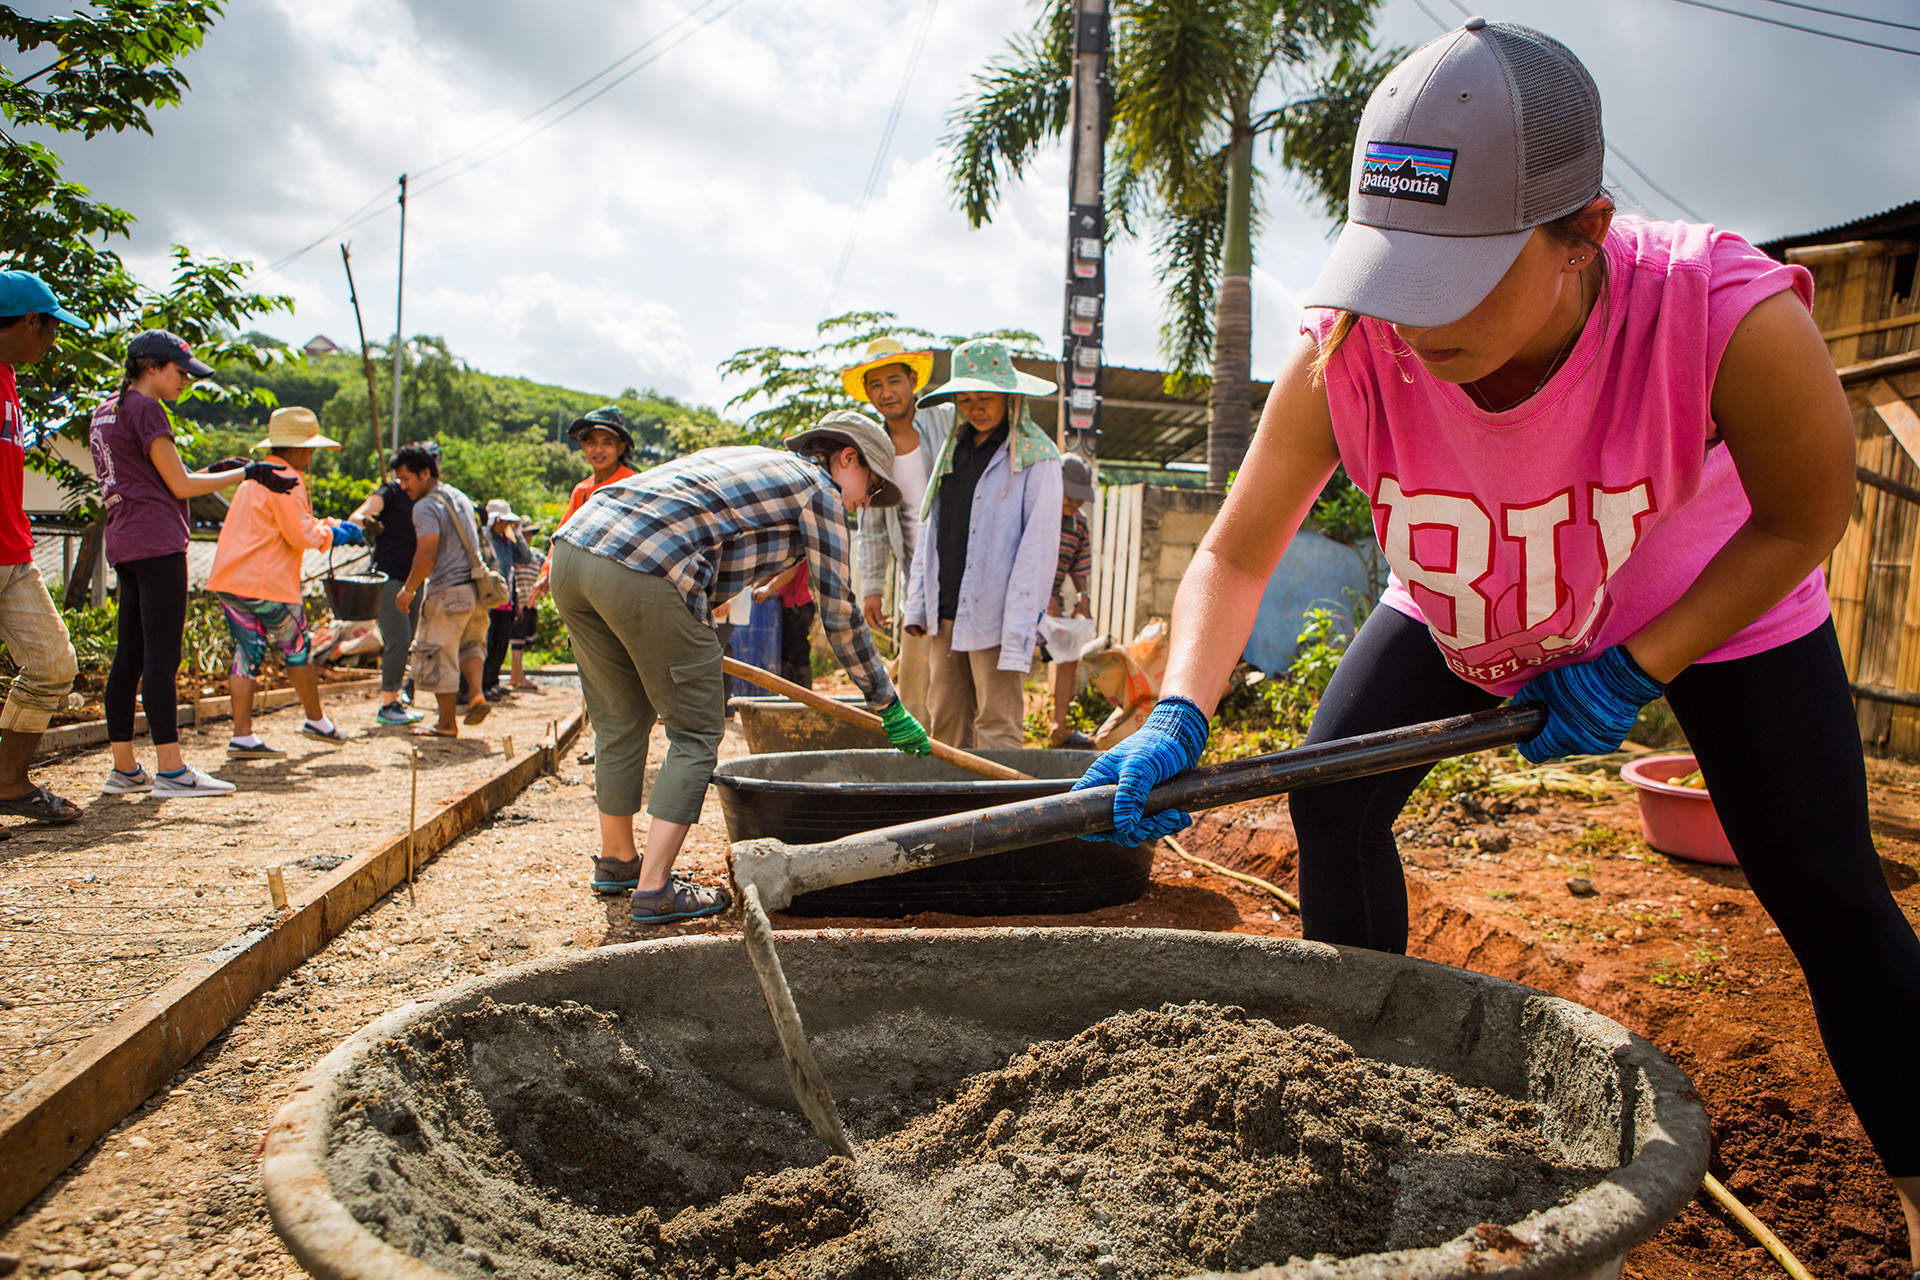 Boston University Sargent School of Health Science and Rehabilitation students help pave a section of road in an Akha hill tribe village in the province of Chiang Rai during a service learning trip to Thailand.